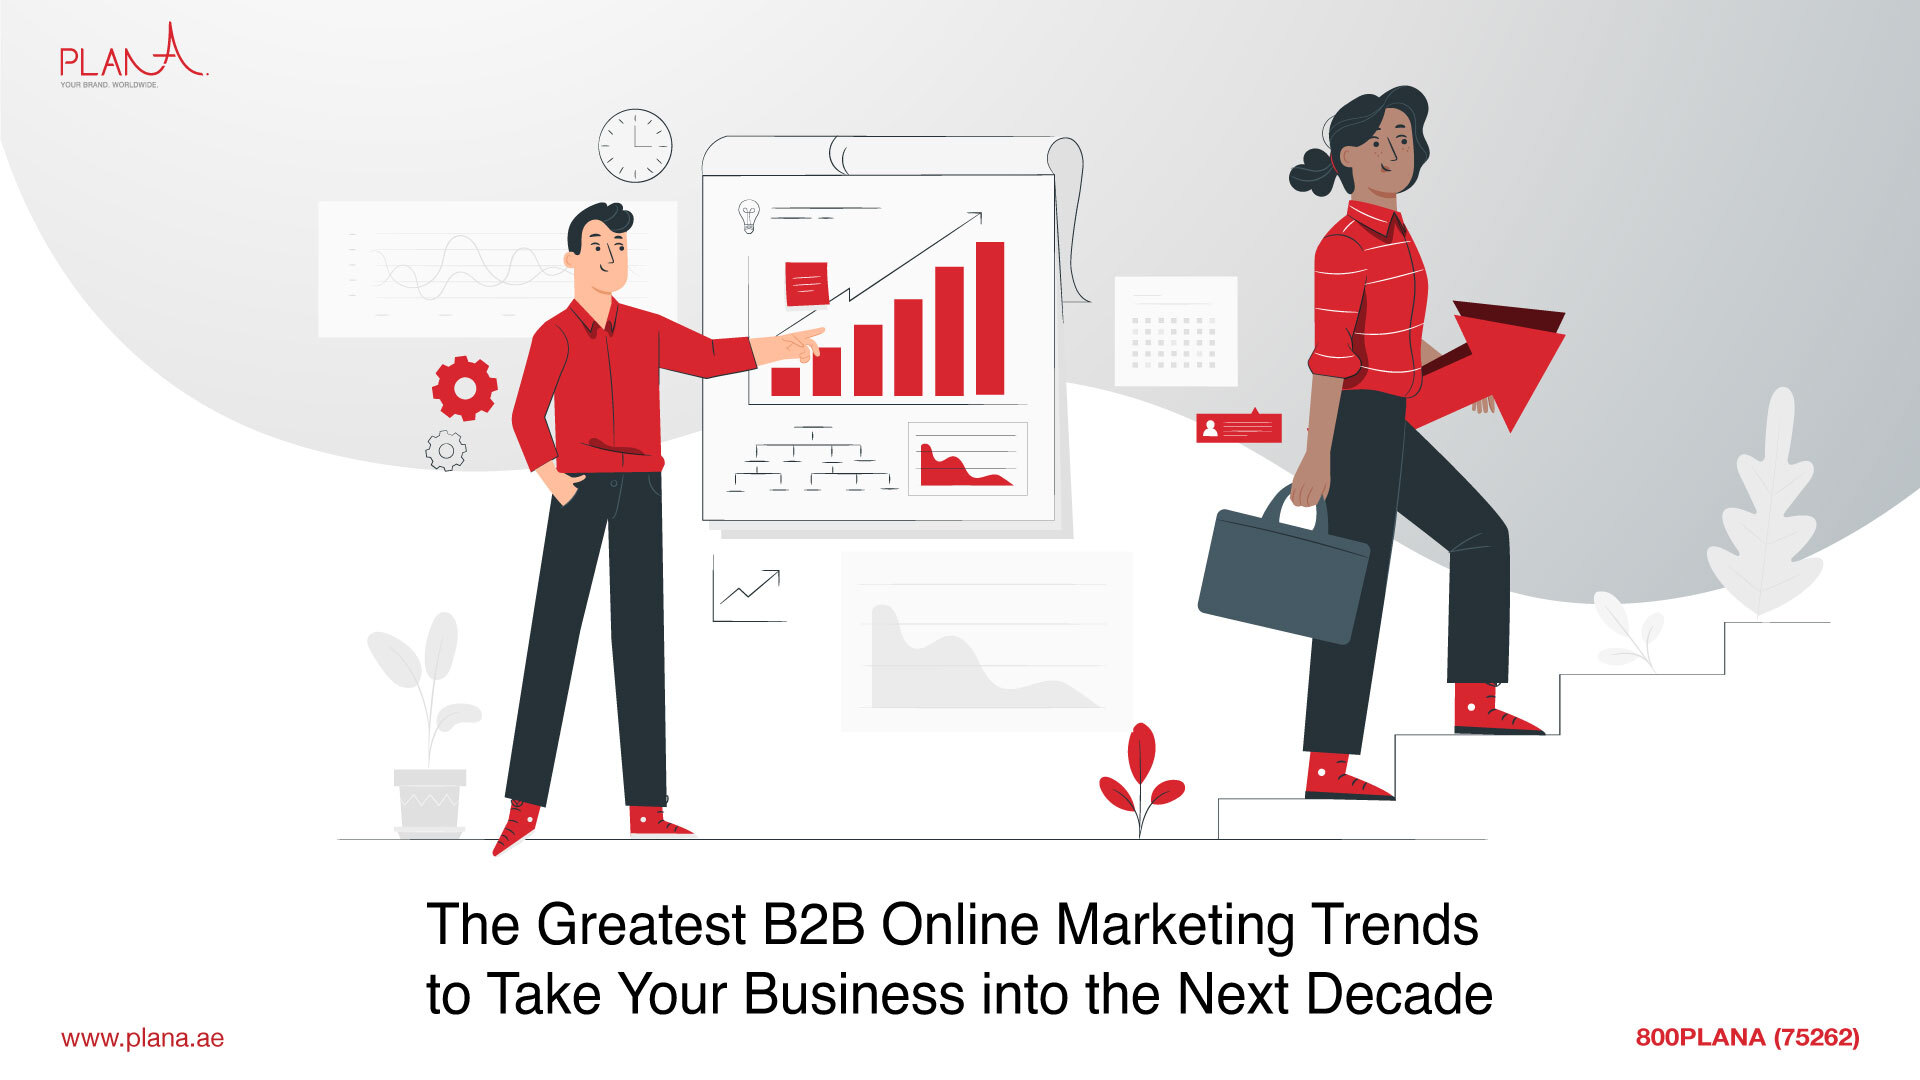 The Greatest B2B Online Marketing Trends to Take Your Business into the Next Decade